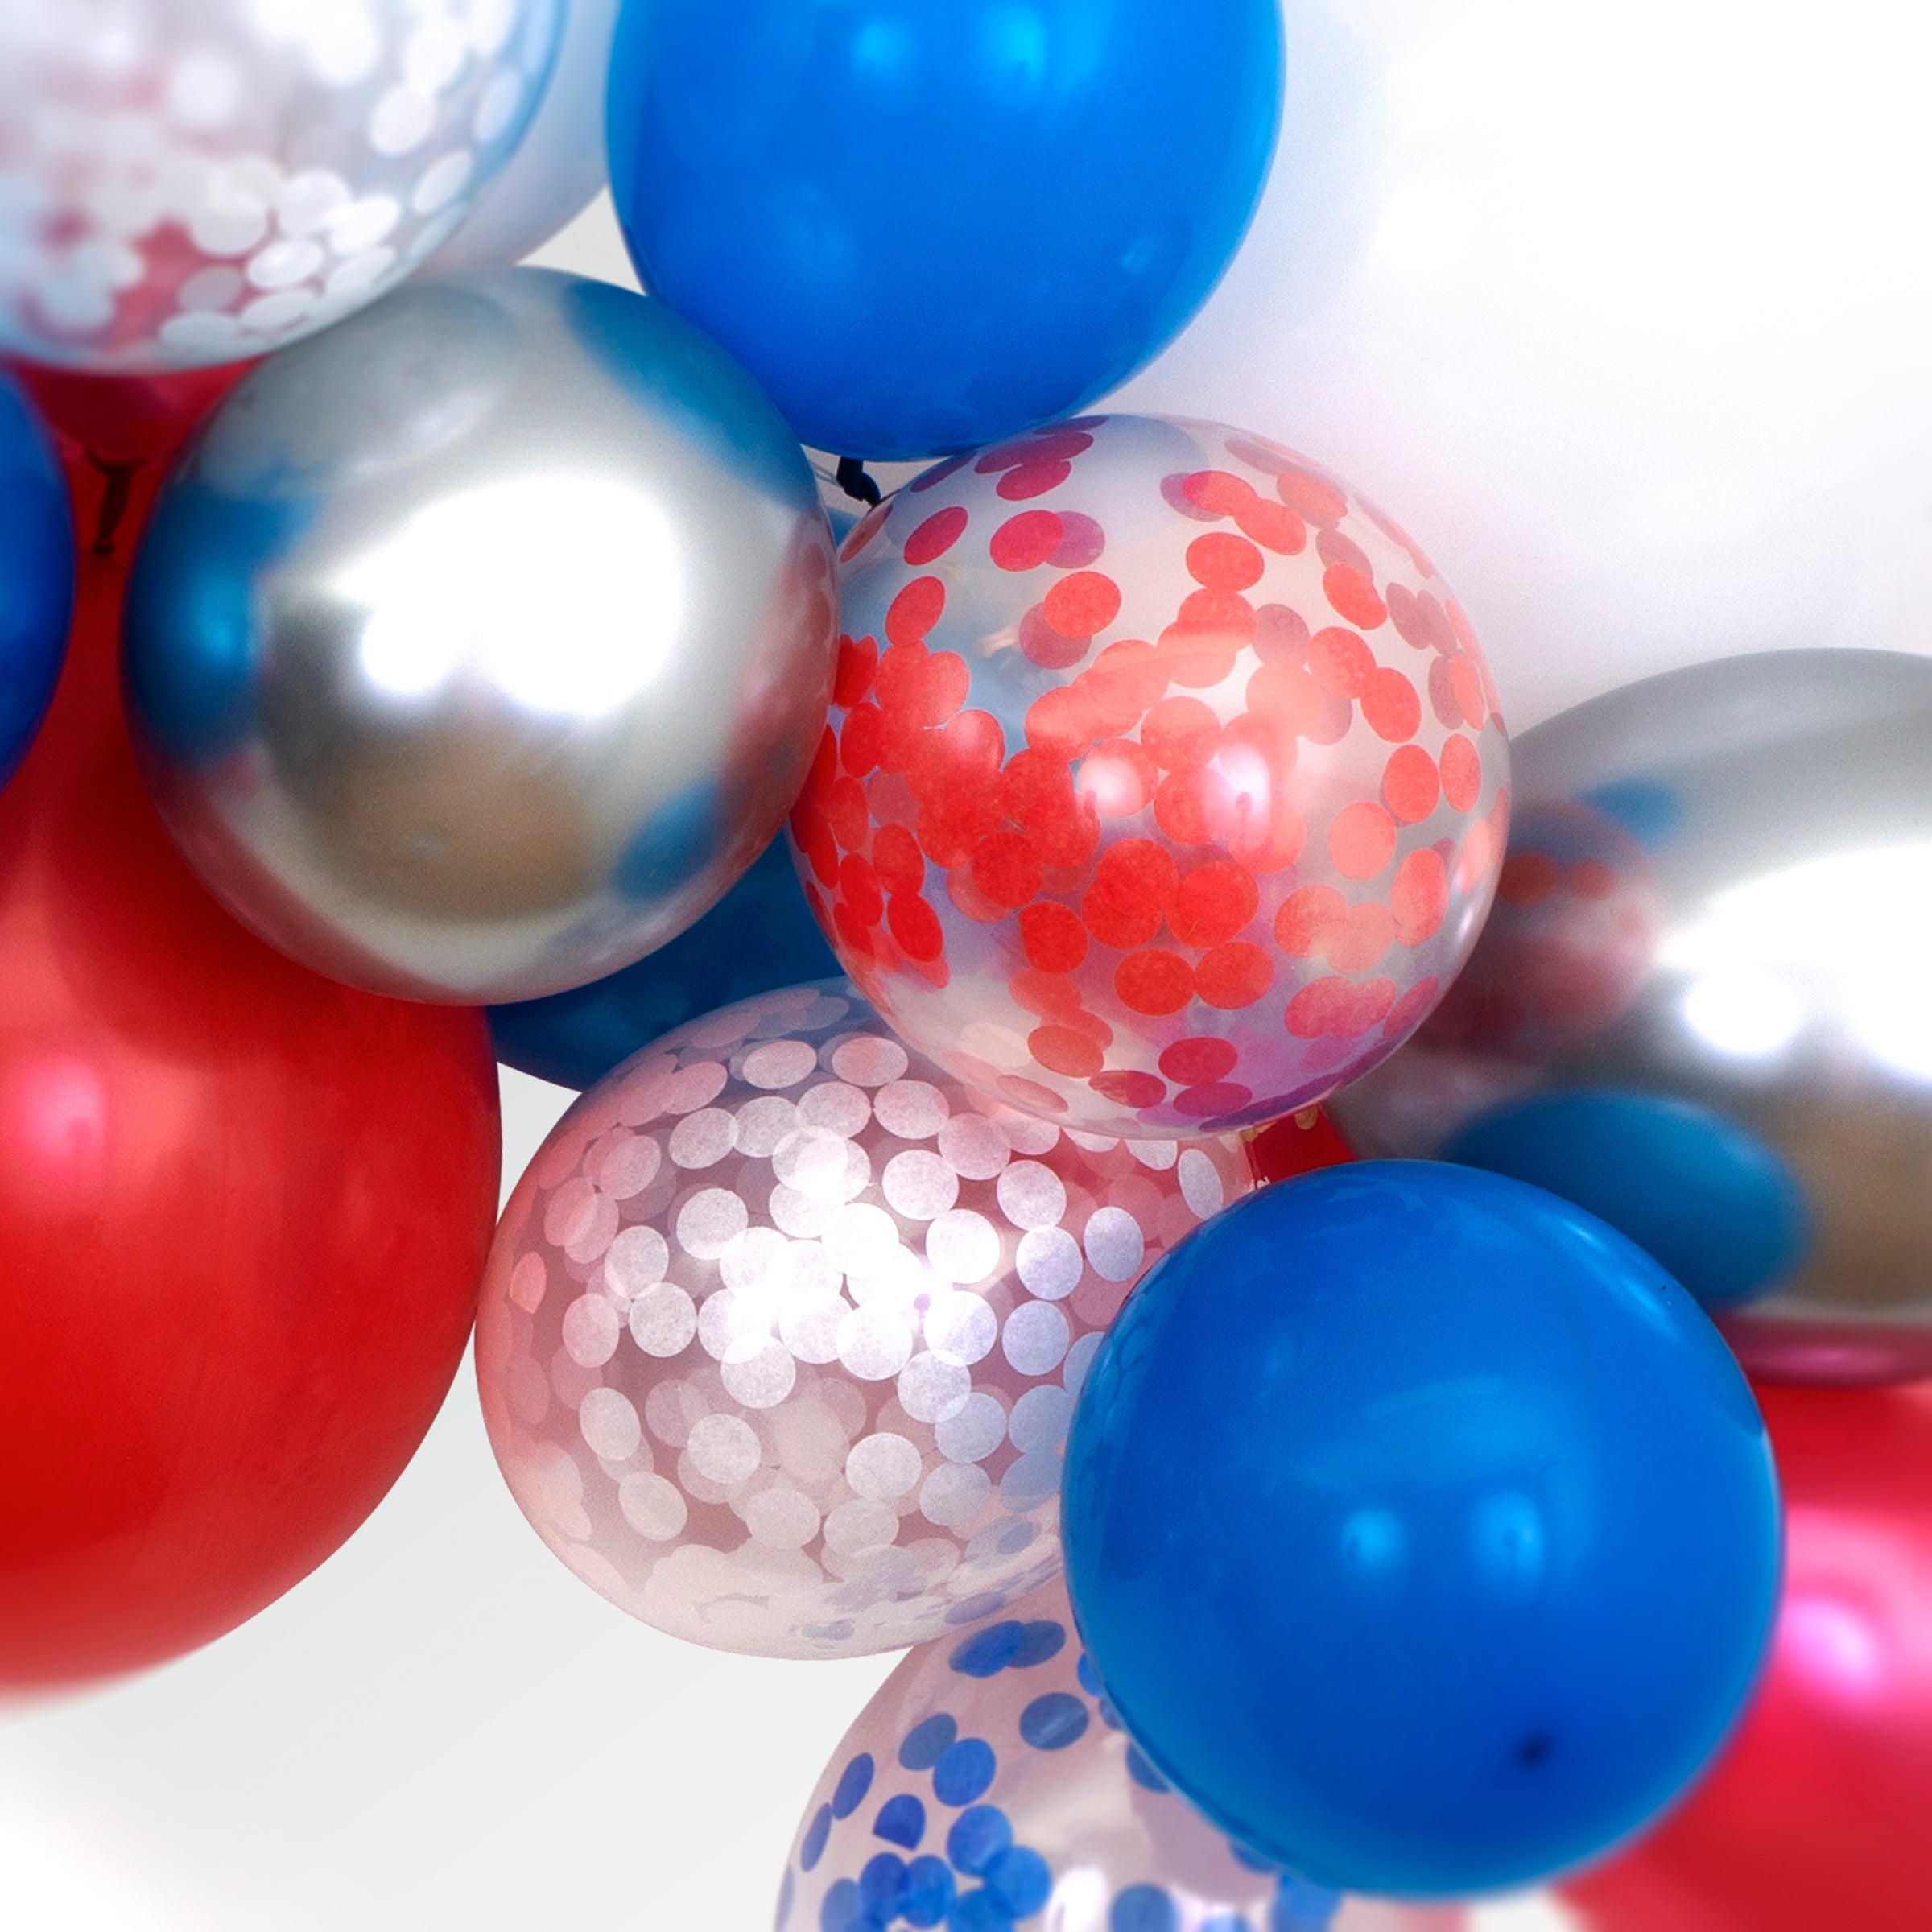 Our Independence Day balloon garland kit, with red, blue, white and silver balloons looks amazing.